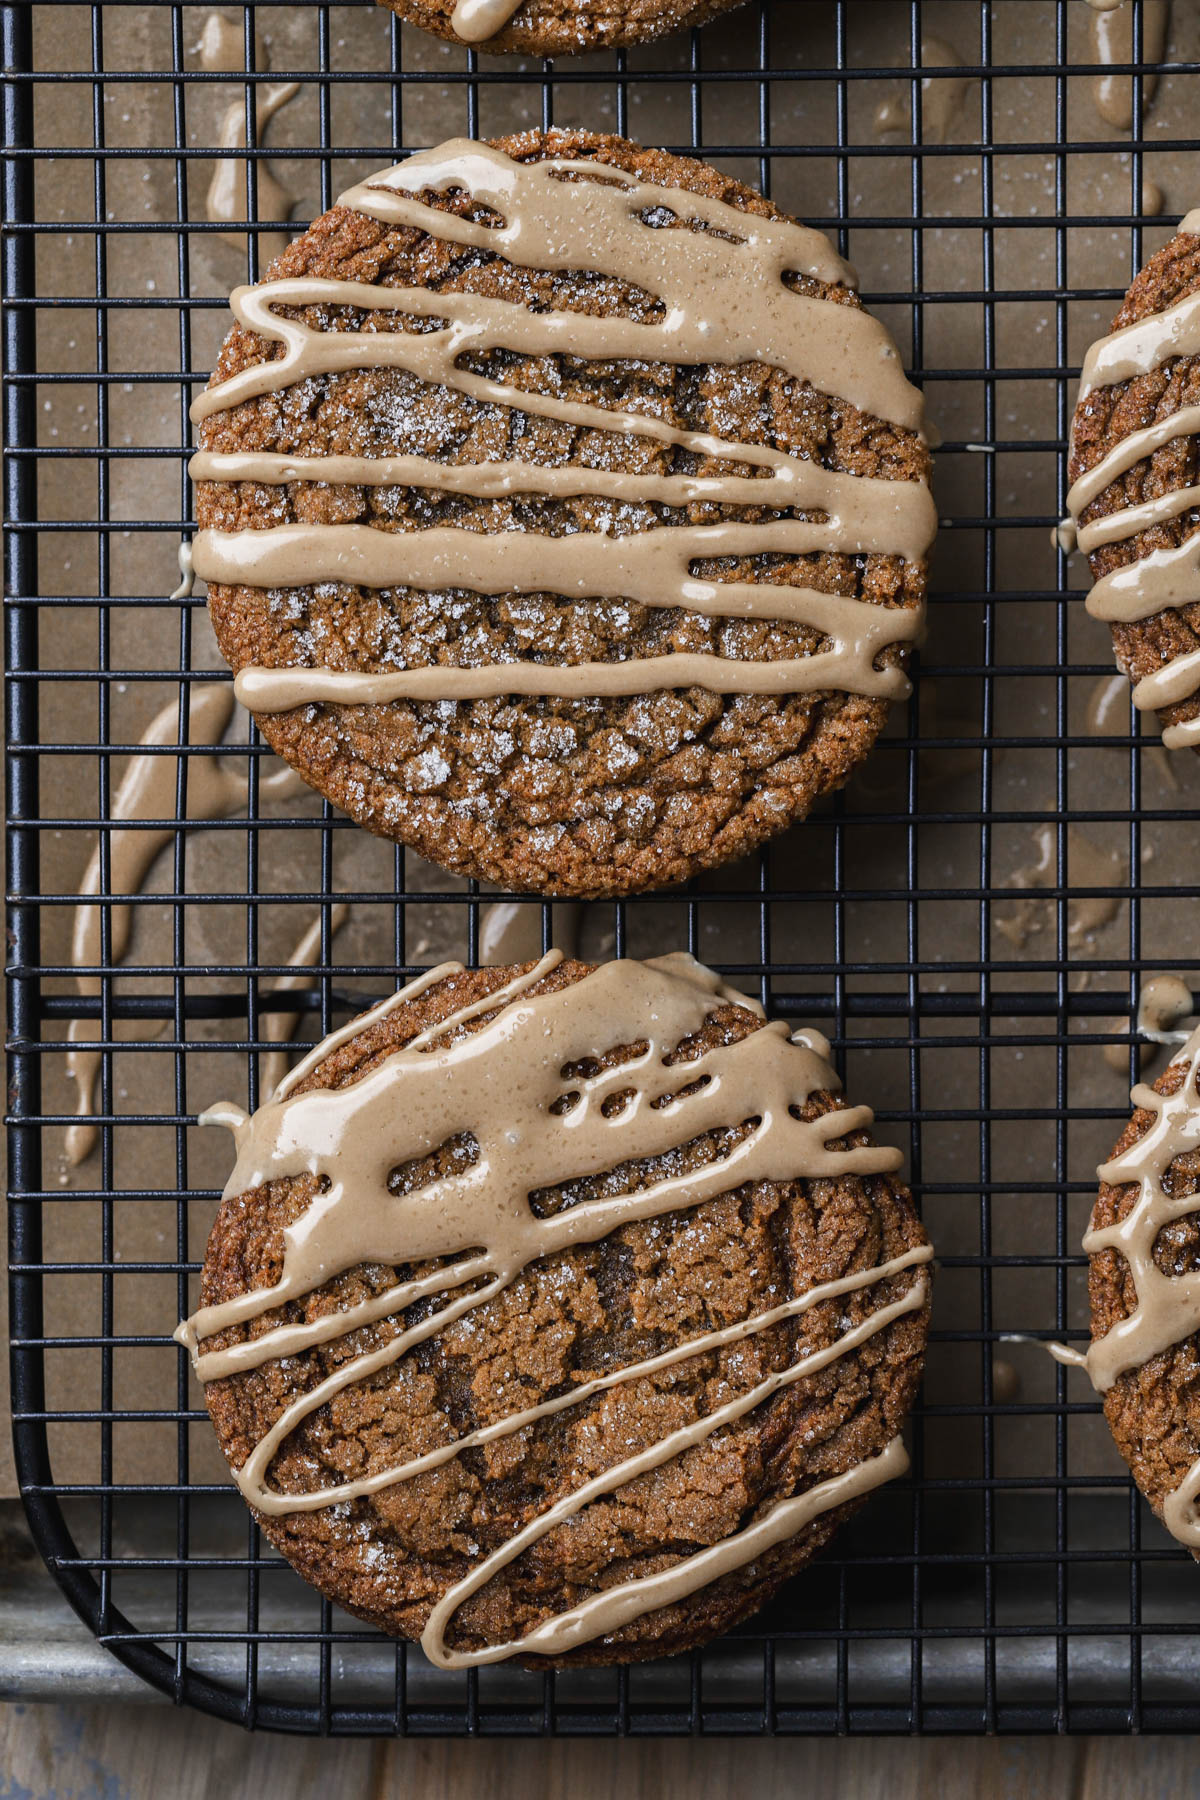 Gingerbread cookies drizzled with coffee glaze.  